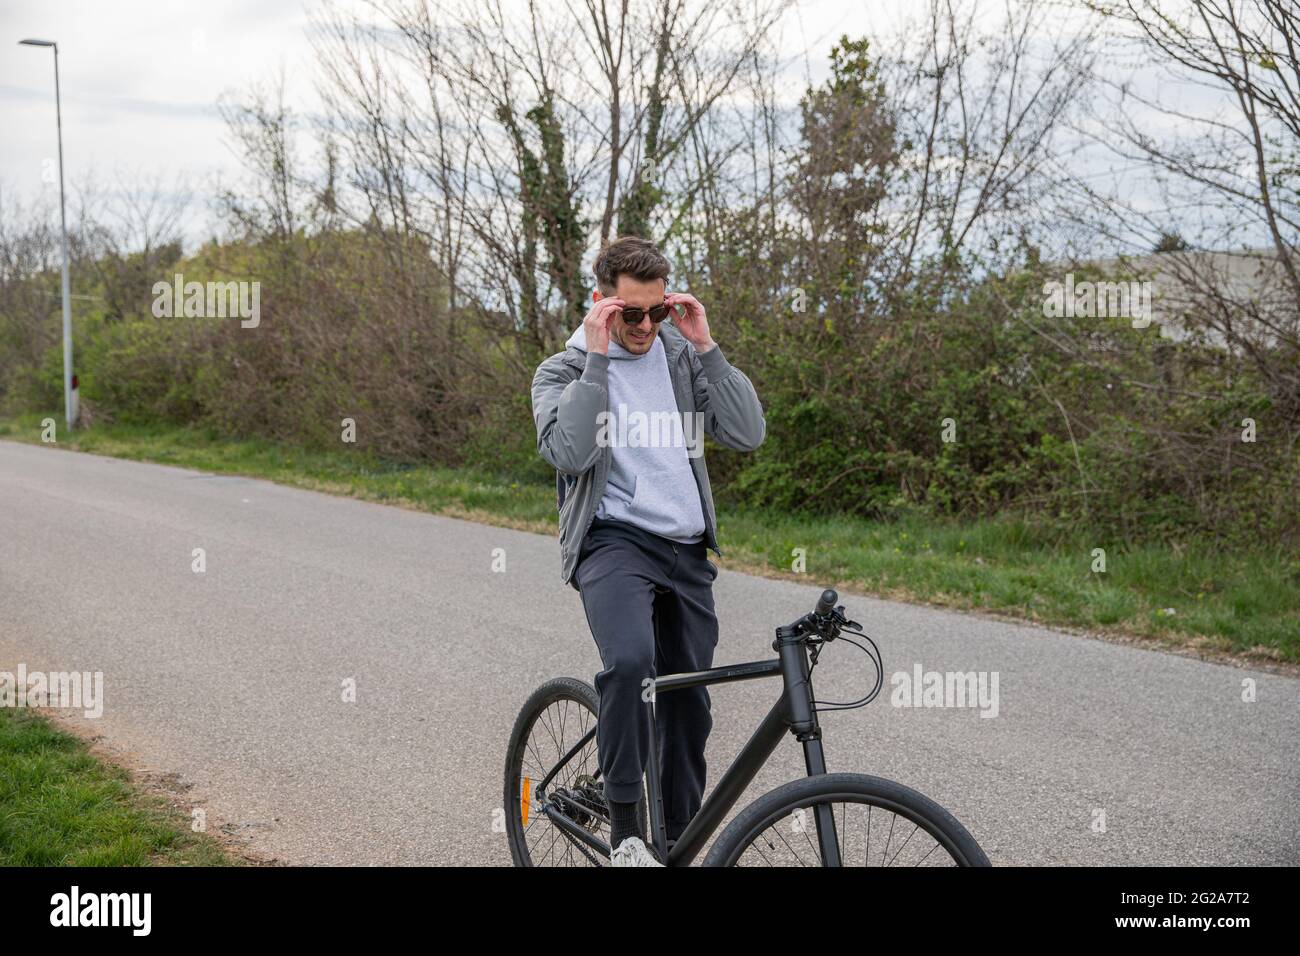 A young boy sitting on his bicycle wearing sunglasses, is ready to go for a ride. Transportation and outdoor life concept Stock Photo